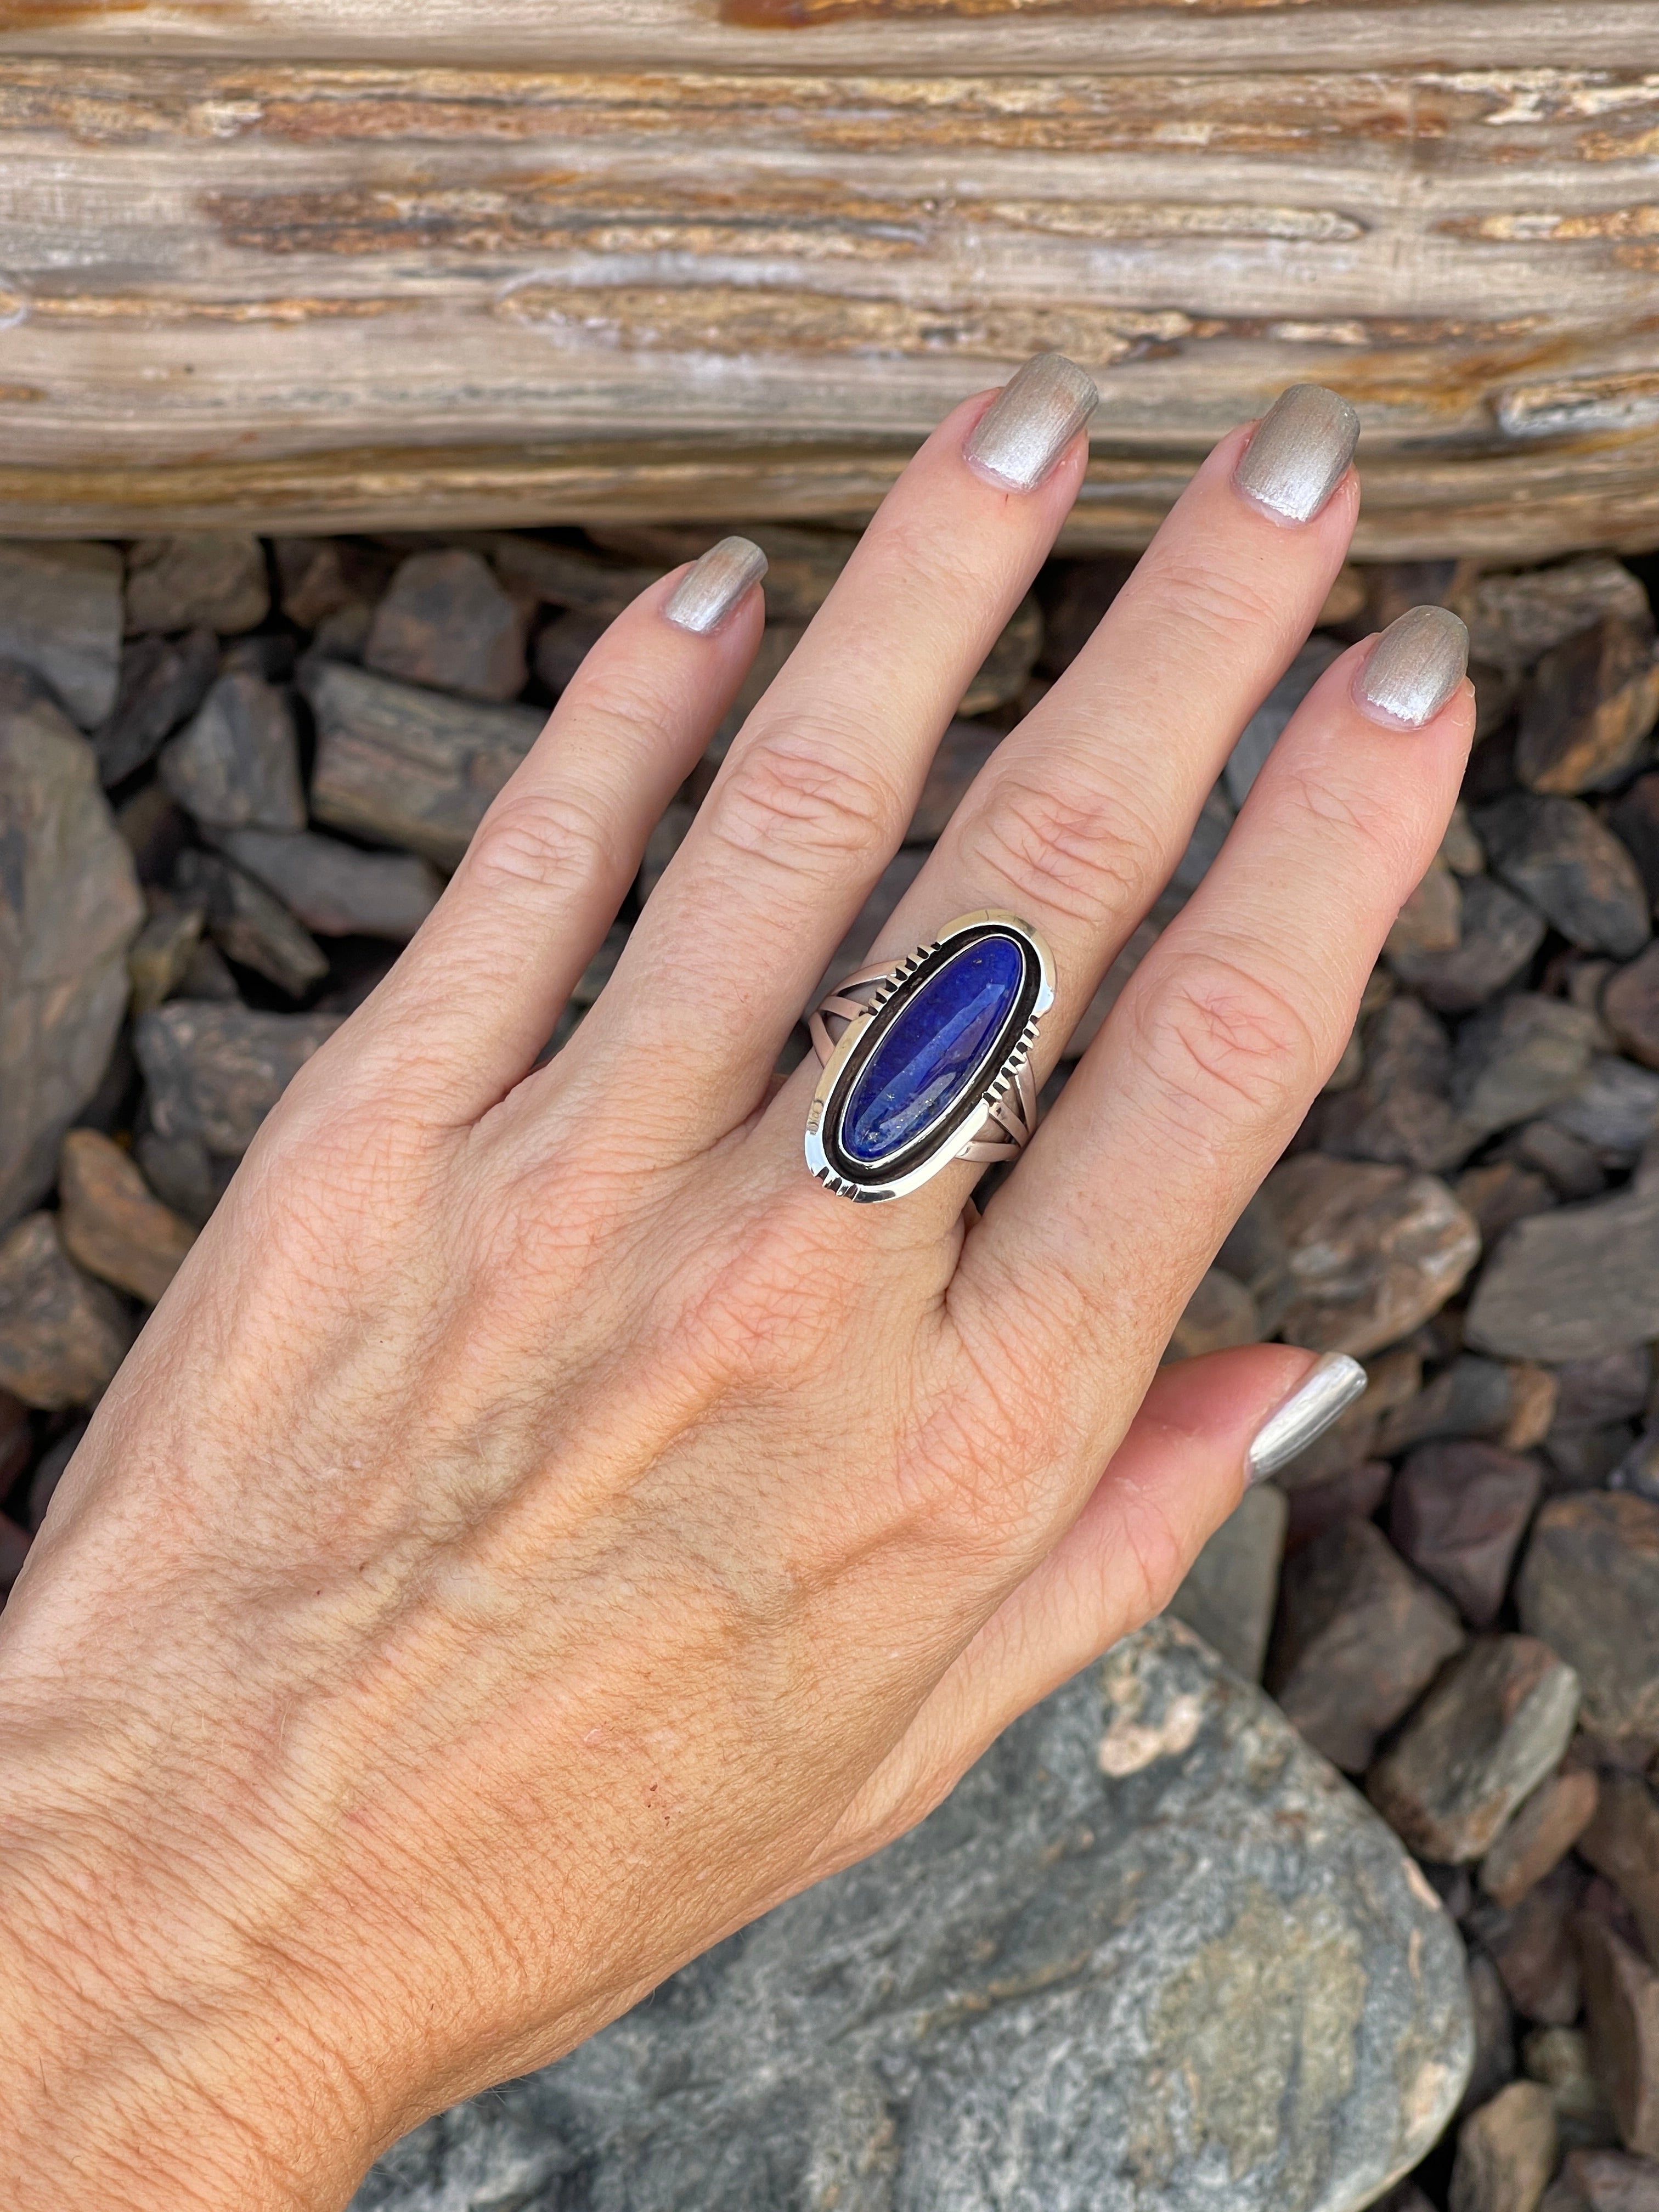 Handmade Solid Sterling Silver Blue Lapis Ring with Shadow Box Trim - Size 8